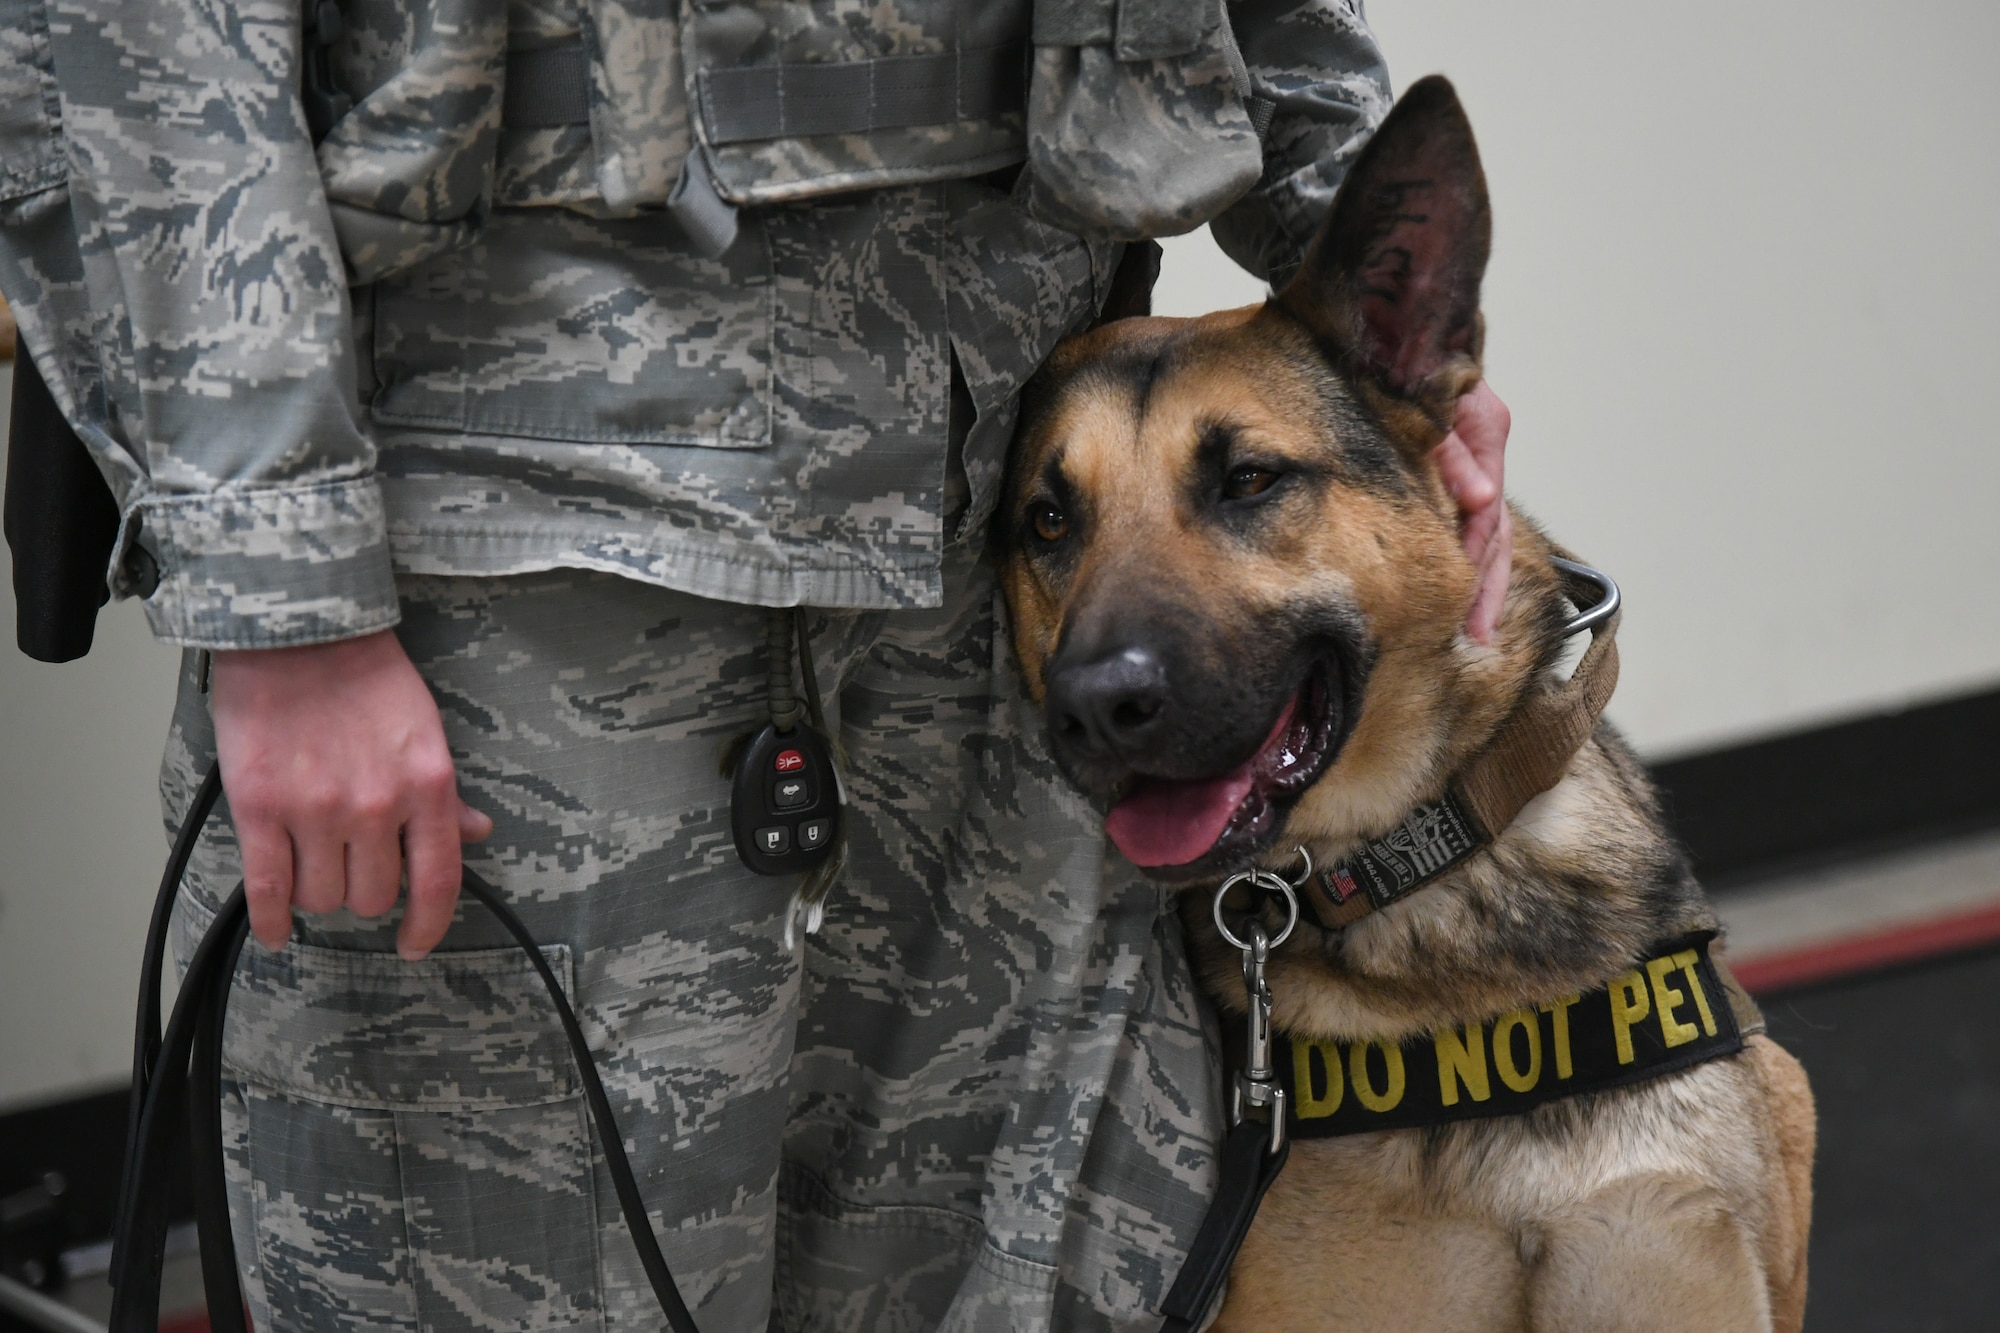 Joe, a military working dog assigned to the 75th Security Force Squadron at Hill Air Force Base, Utah, sits next to his handler, Senior Airman Michelle Winters, March 4, 2020. Joe is a single-purpose MWD, trained as an explosive detection dog. (U.S. Air Force photo by Cynthia Griggs)